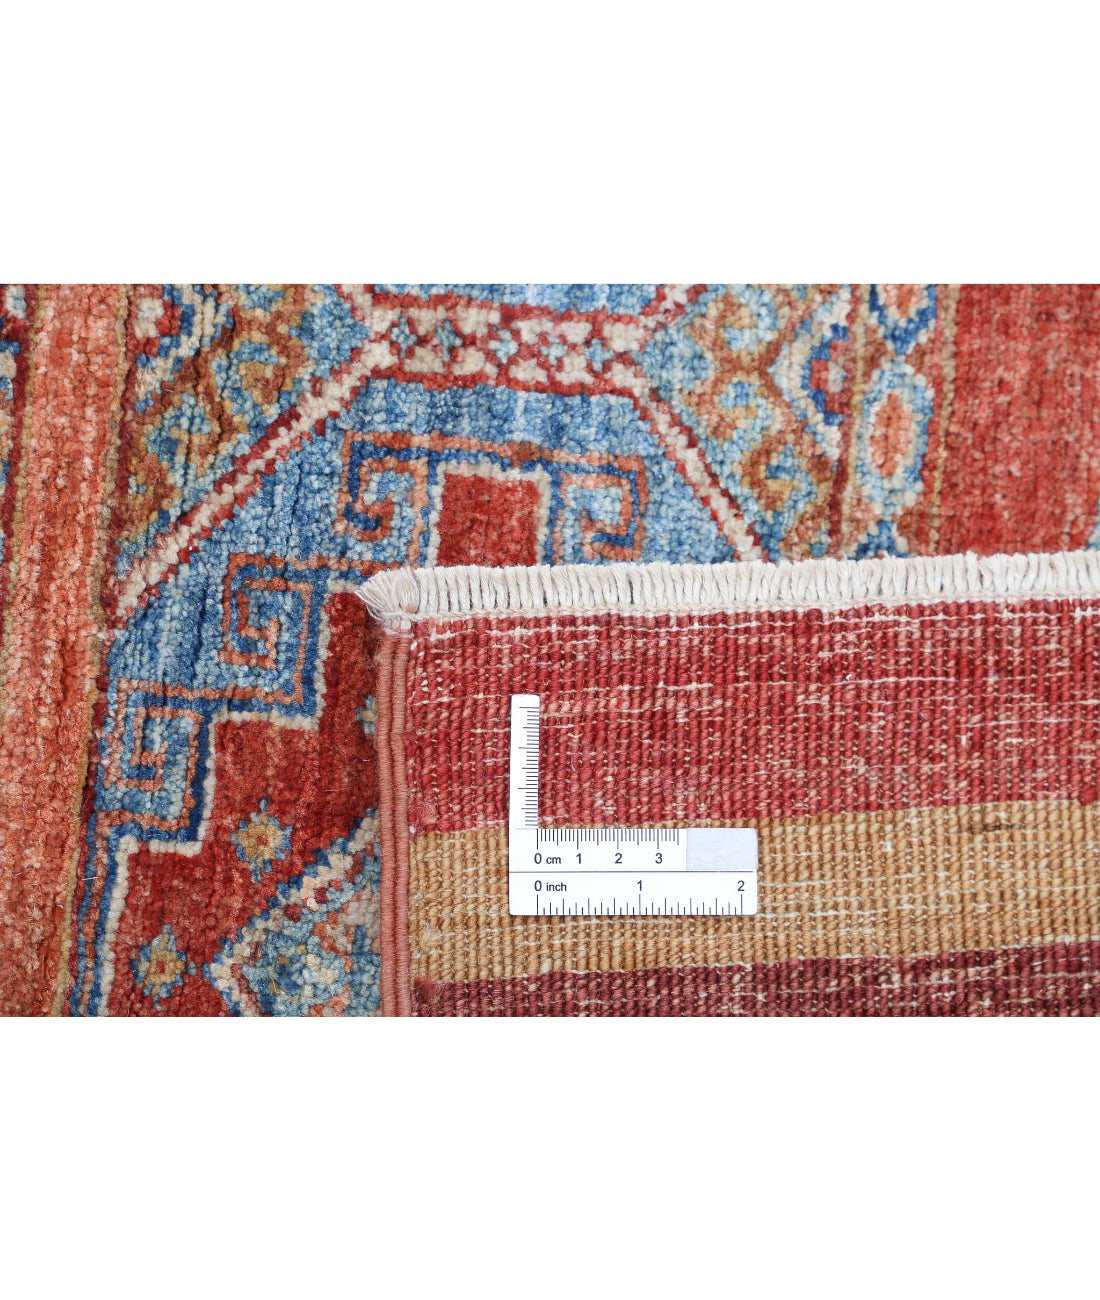 Hand Knotted Khurjeen Wool Rug - 3'0'' x 4'9'' 3'0'' x 4'9'' (90 X 143) / Multi / Multi